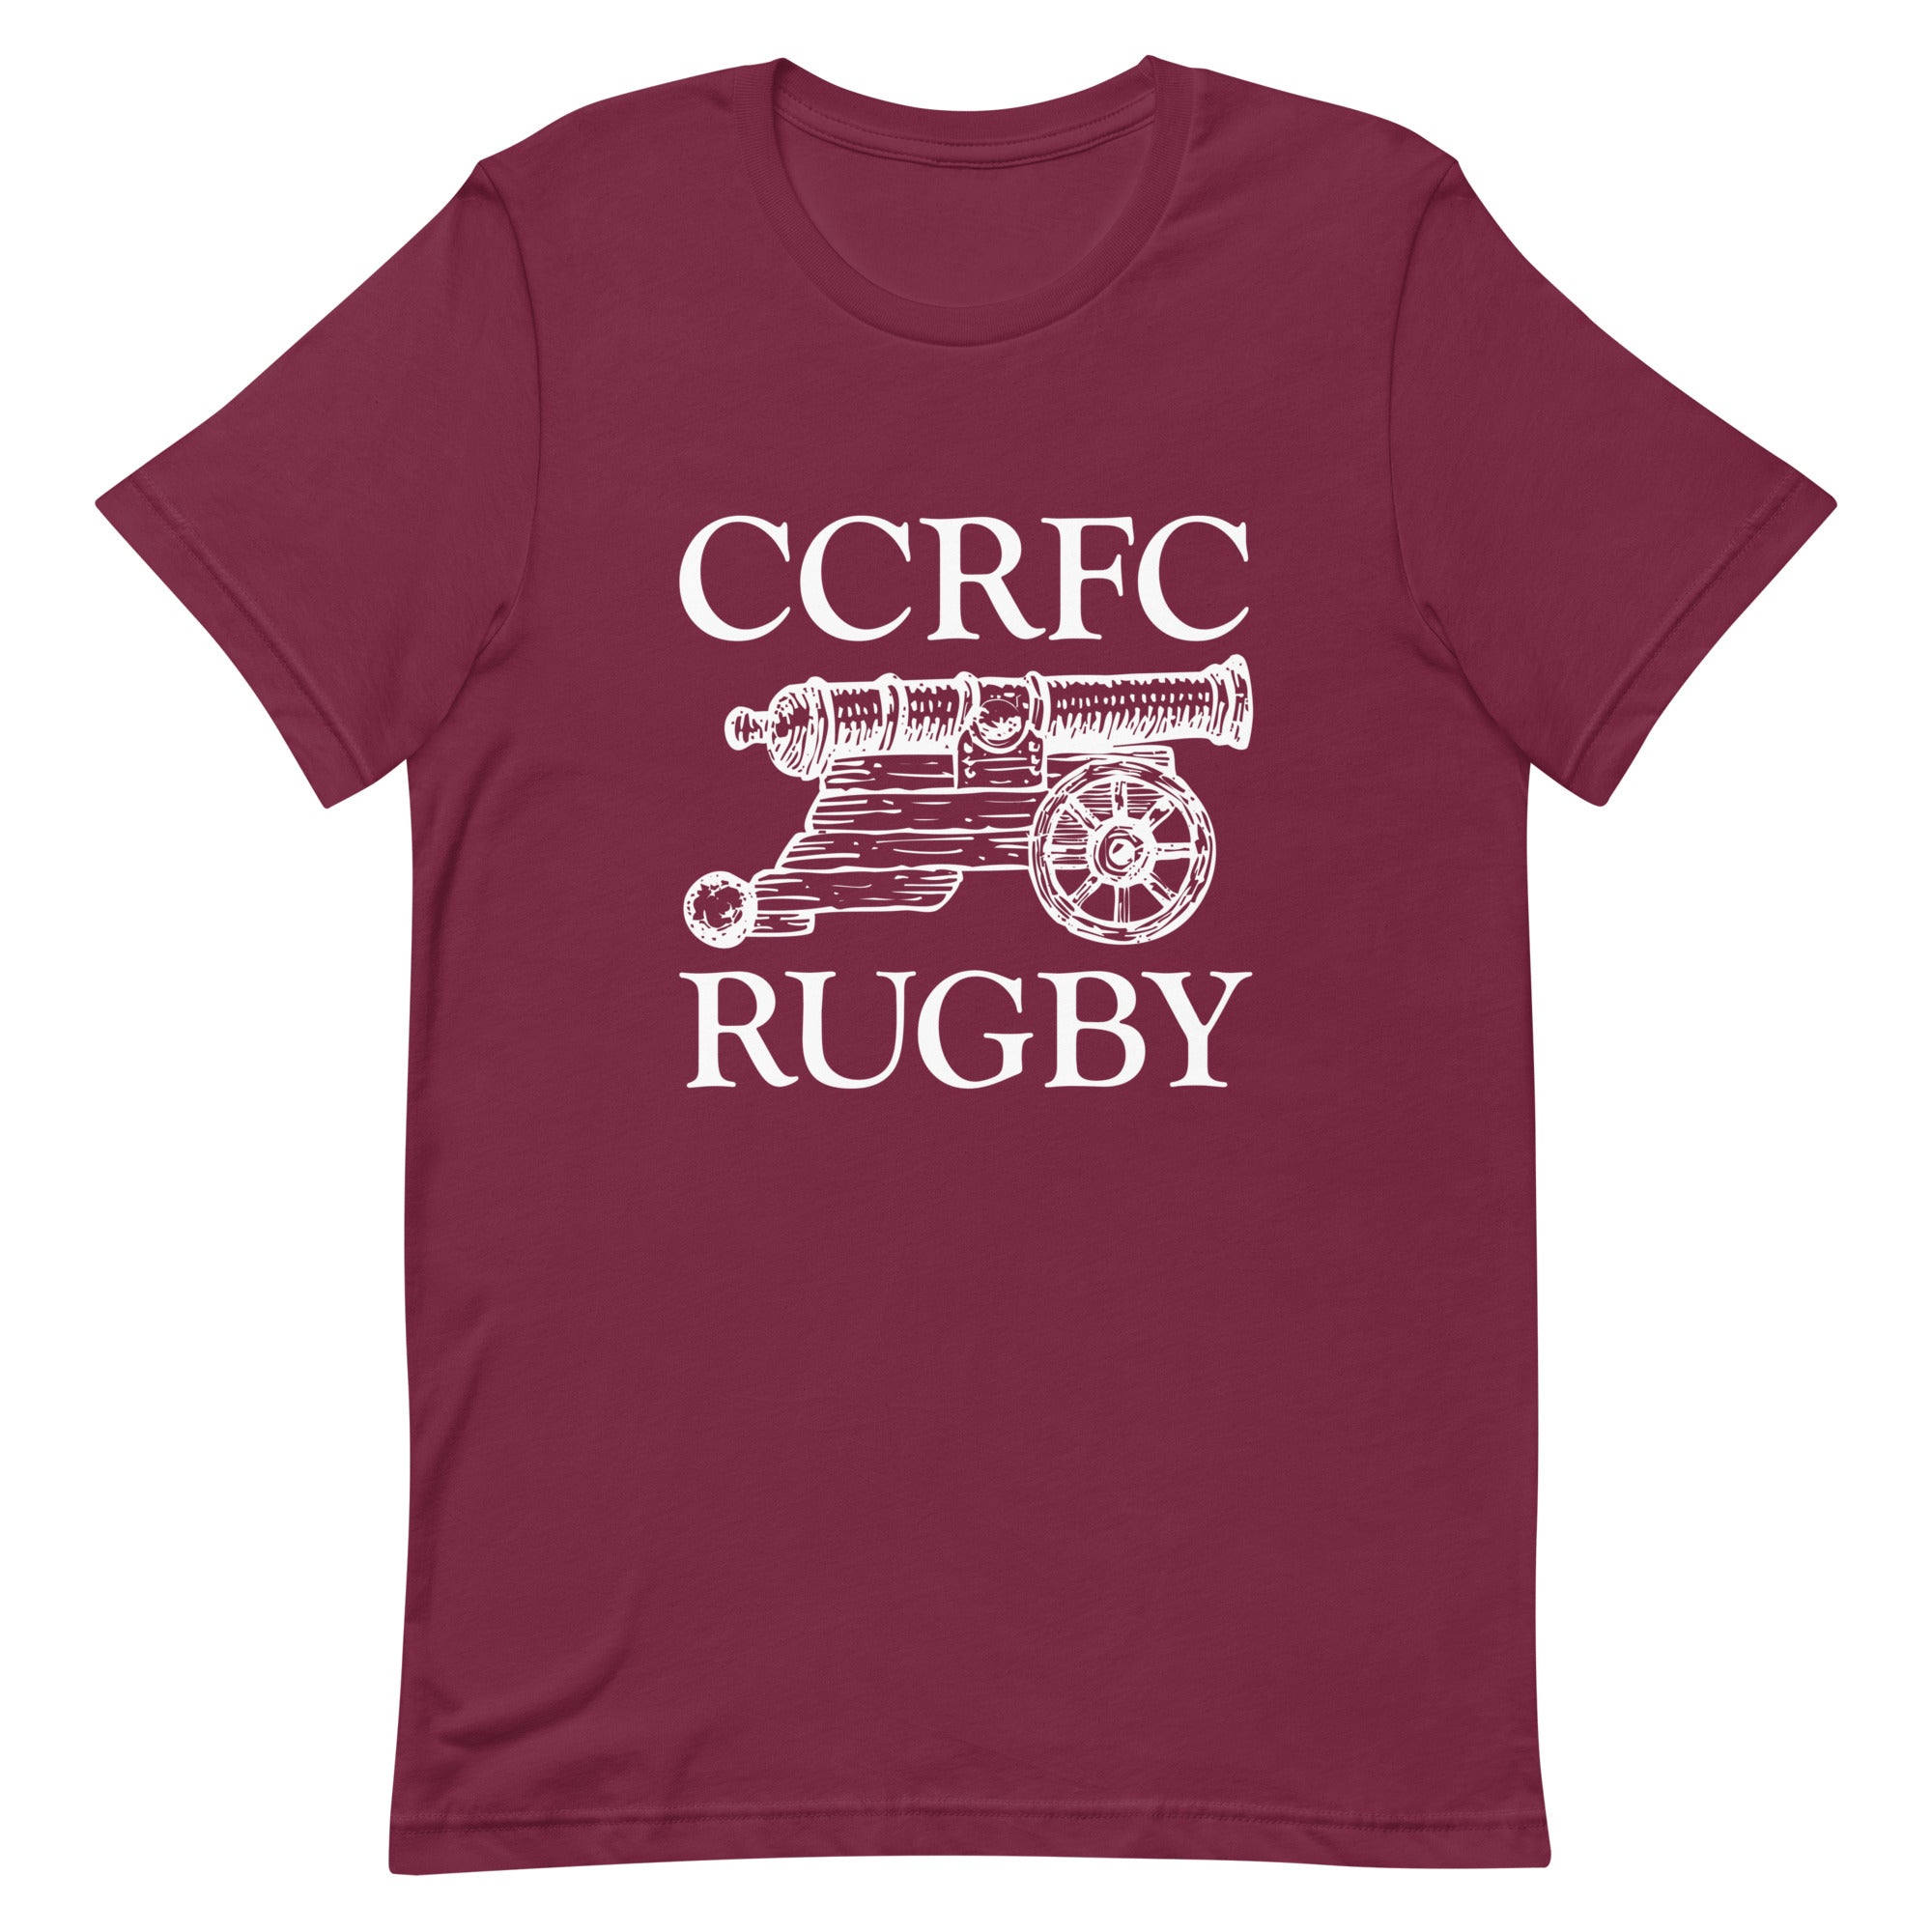 Rugby Imports CCRFC Social T-Shirt